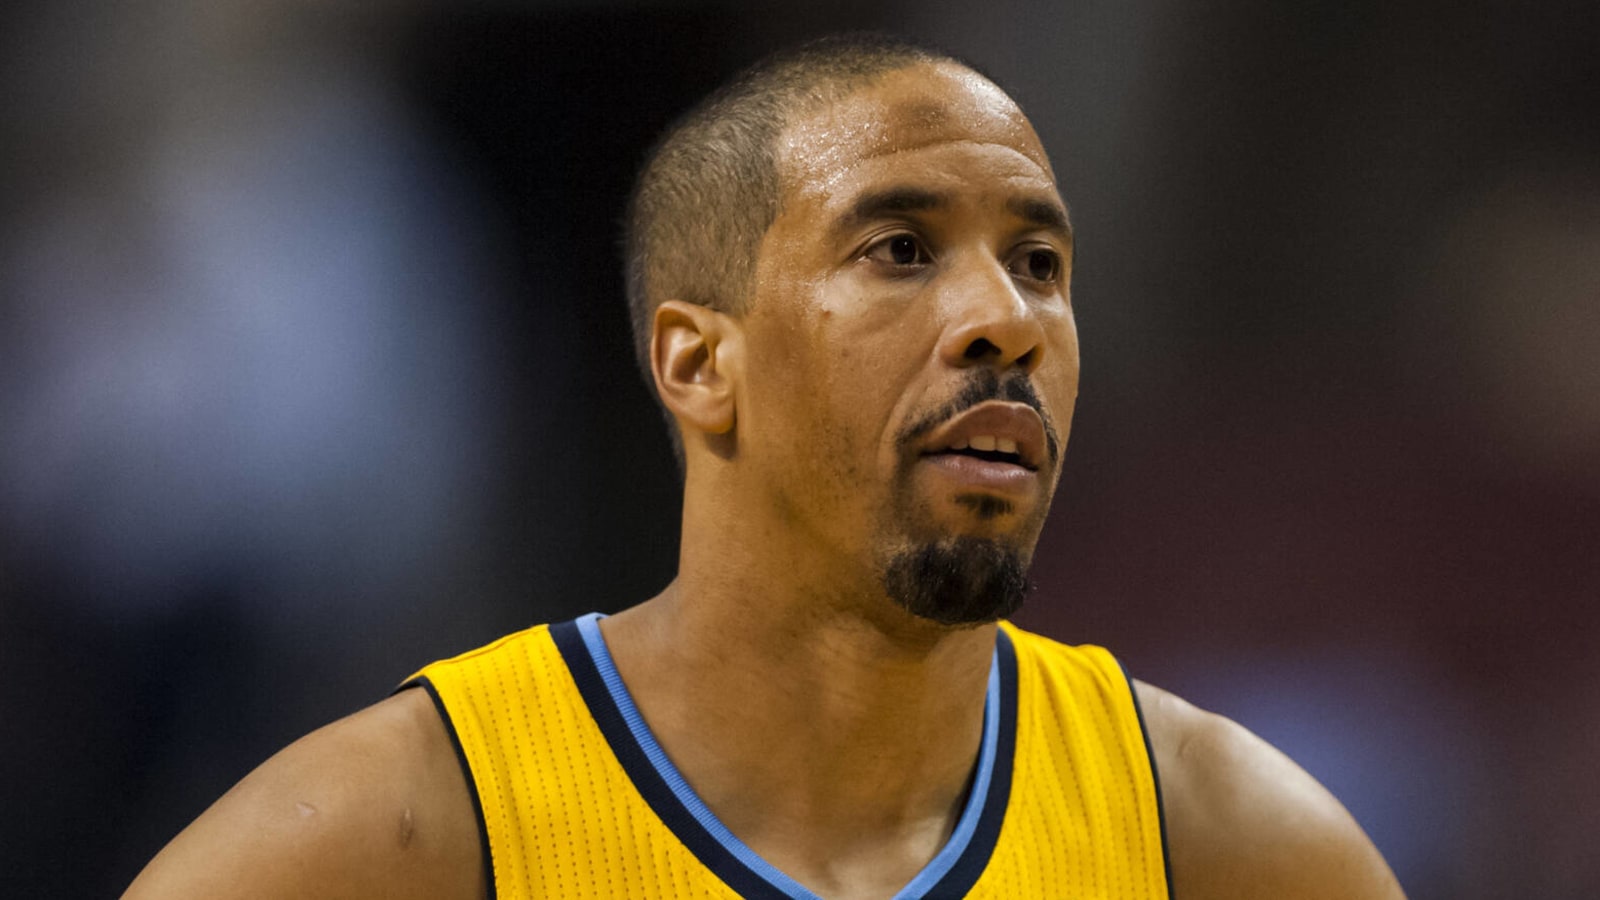 Denver Nuggets to hire ex-player Andre Miller as coach of G League team,  sources say - ESPN